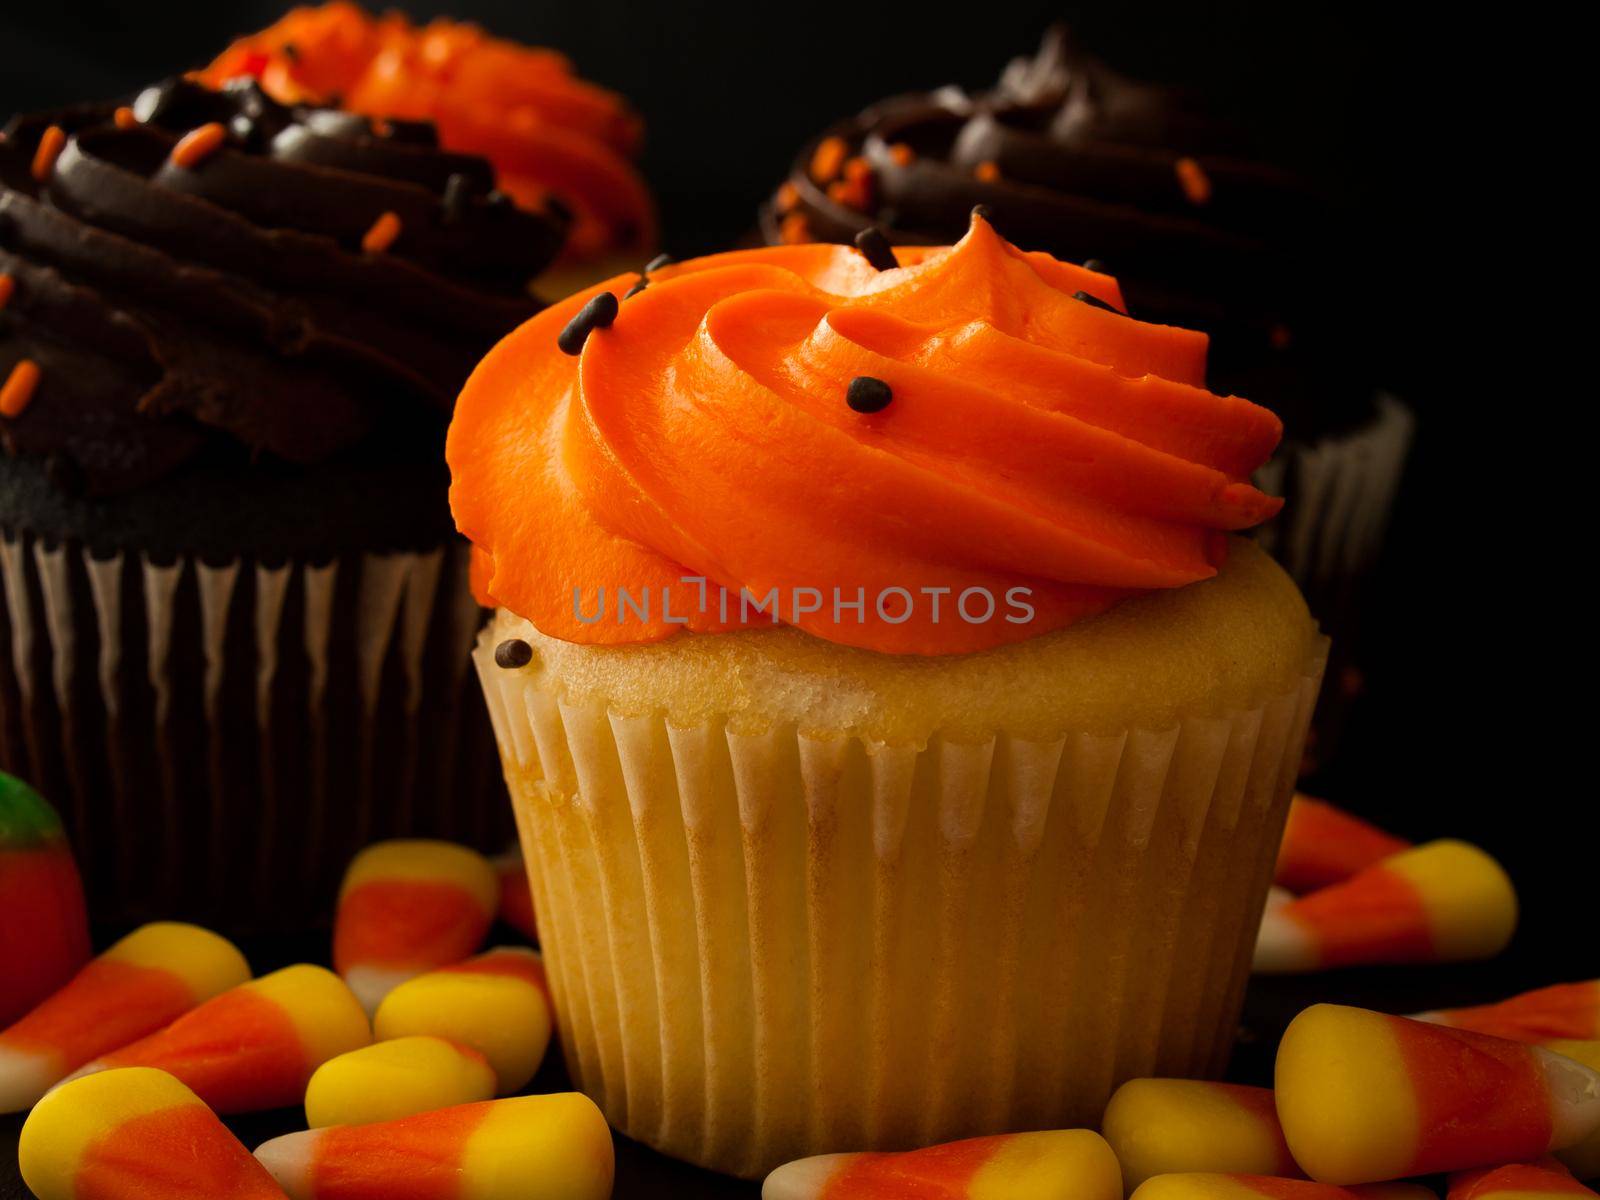 Halloween orange and black cupcakes with candy corn candies on black background.